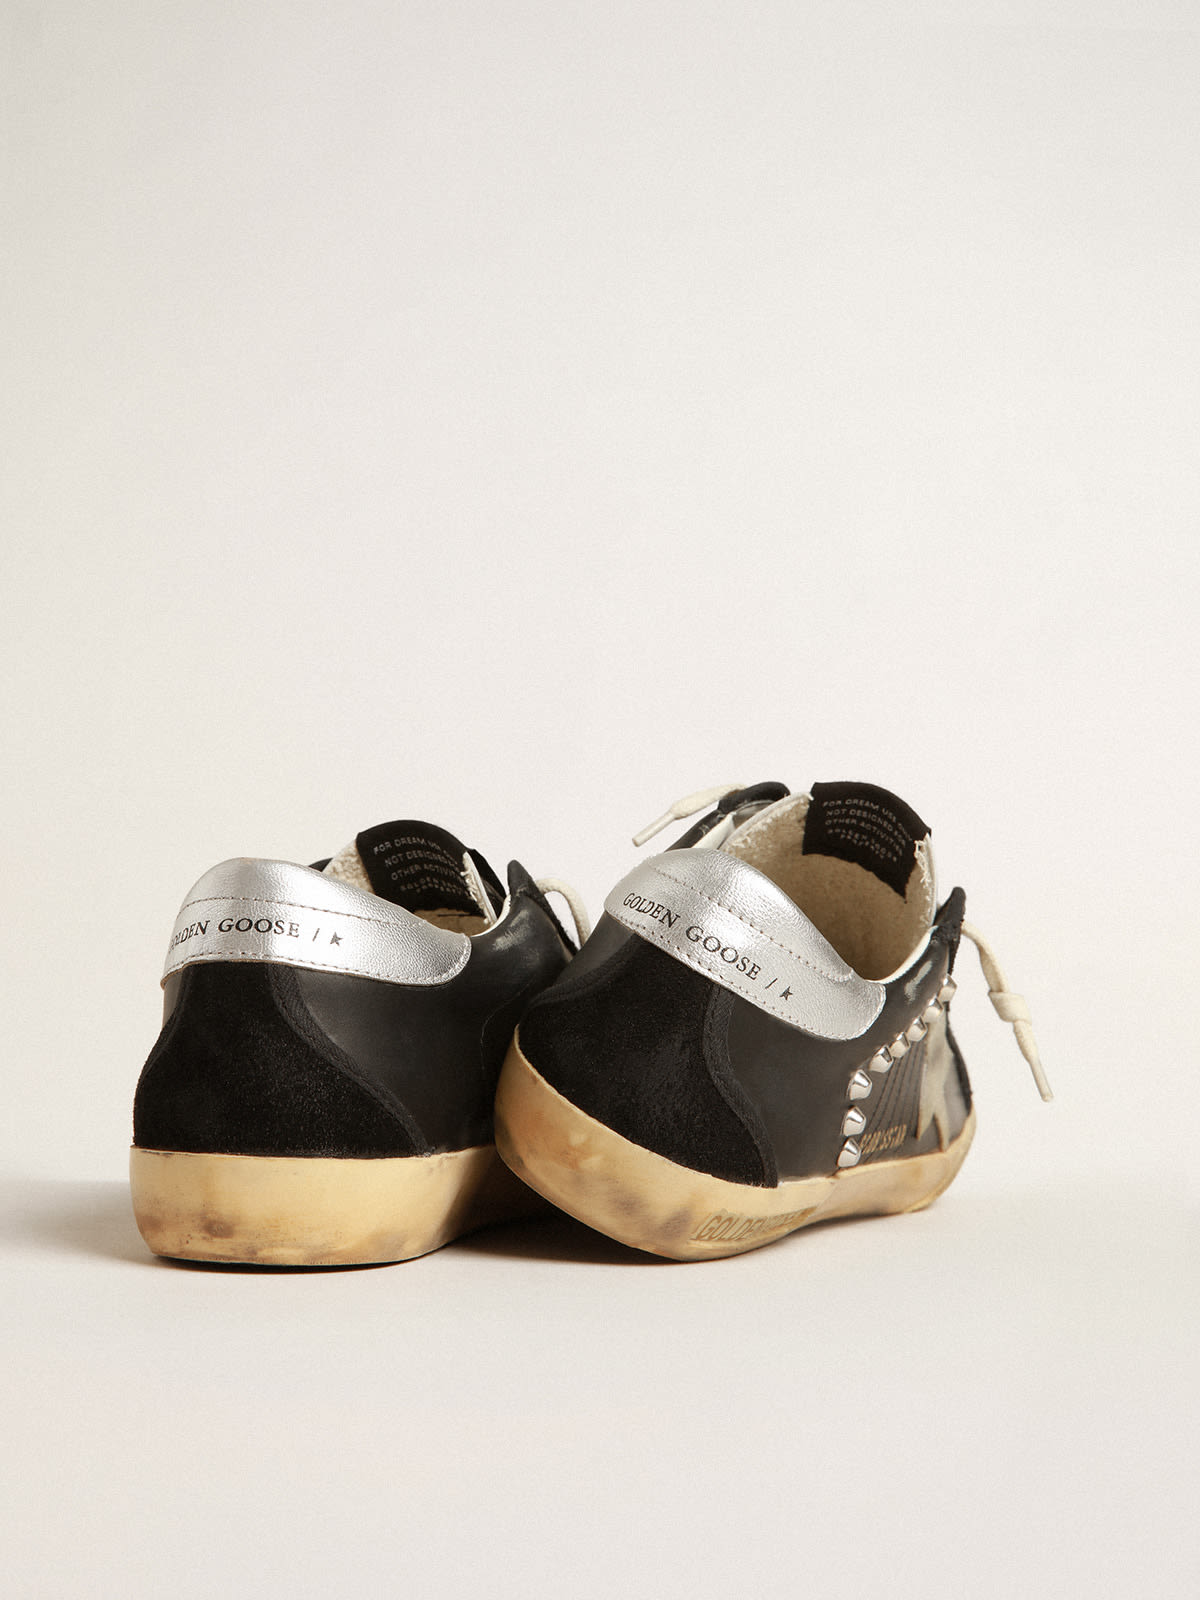 Golden Goose - Men’s Super-Star in black leather and suede with silver studs in 